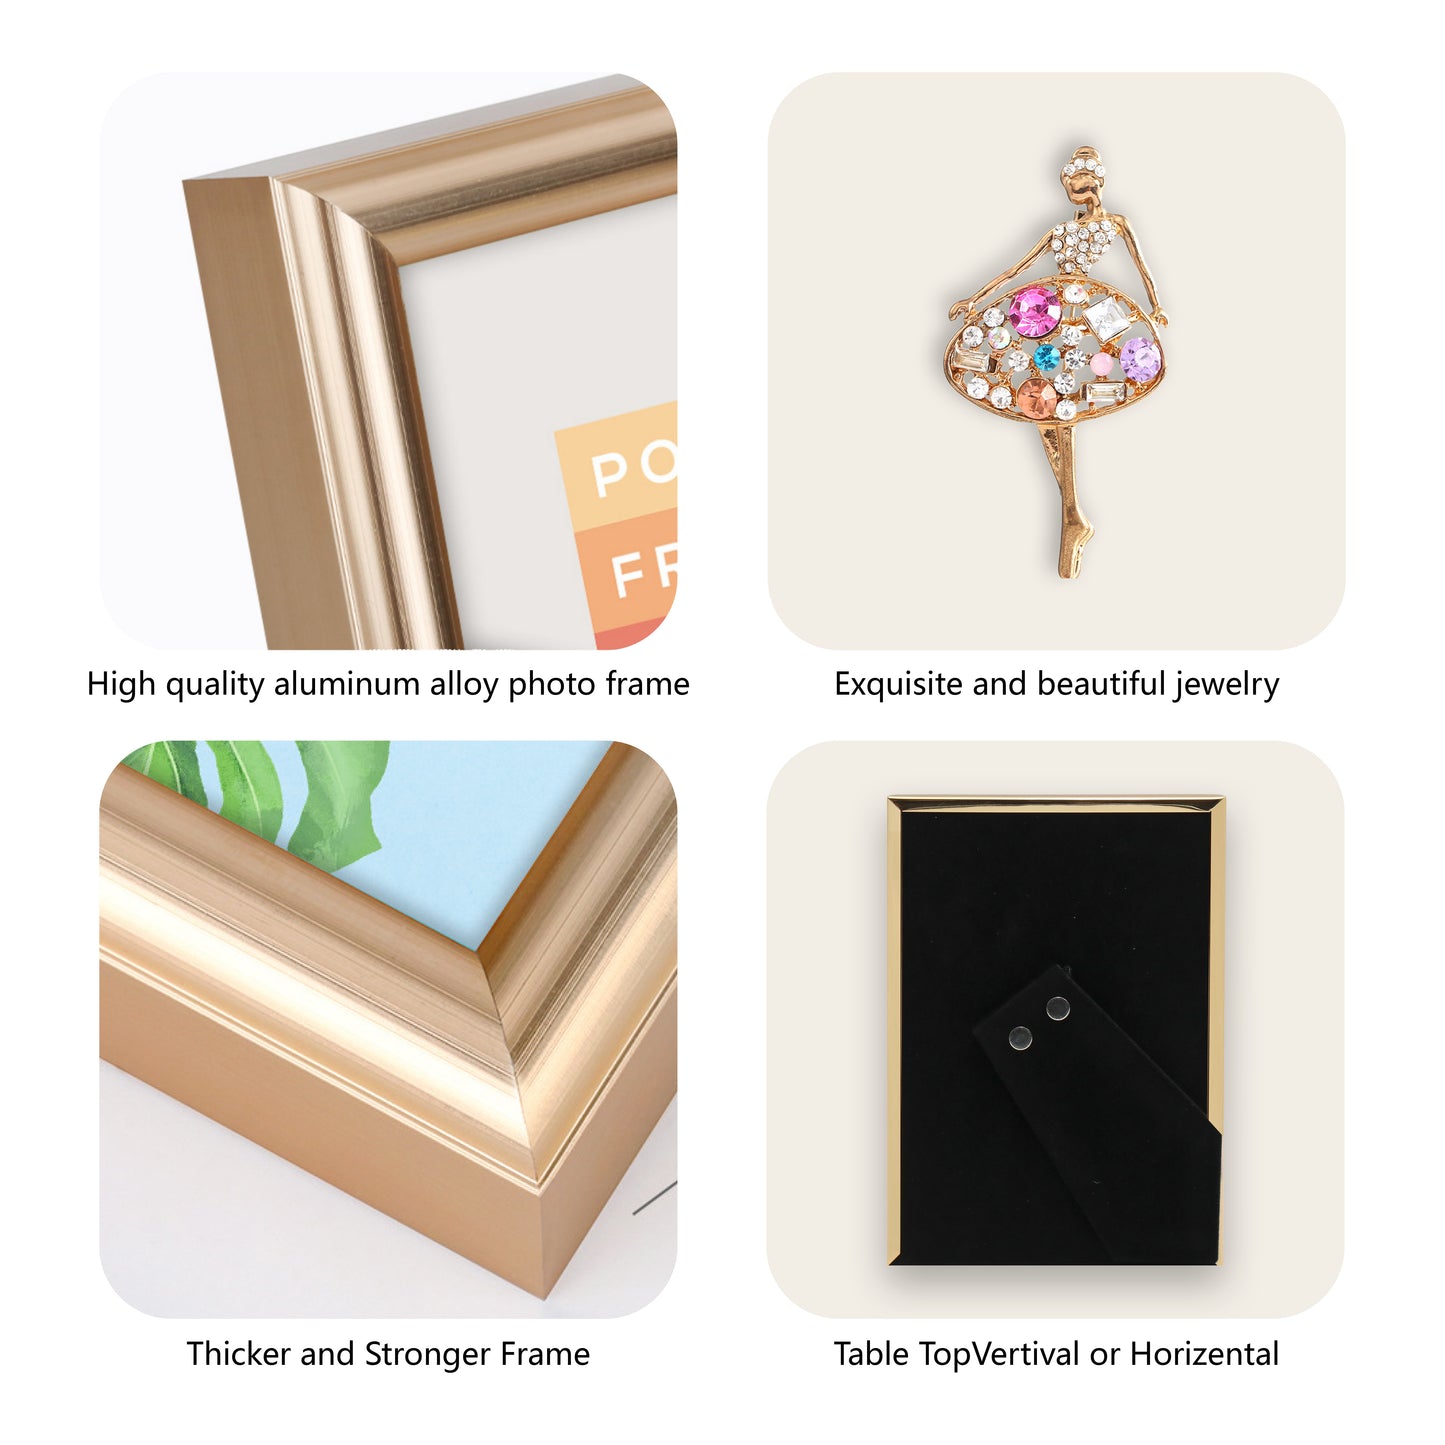 Women's Day Decorative Photo Frames Mother's Day Decorative Photo Frames Dotride 5x7 & 4x6 Picture Frames with Decorations 2 Pack, Metal Photo Frame with Detachable Dancing Girl Ornaments for Wall and Tabletop Display